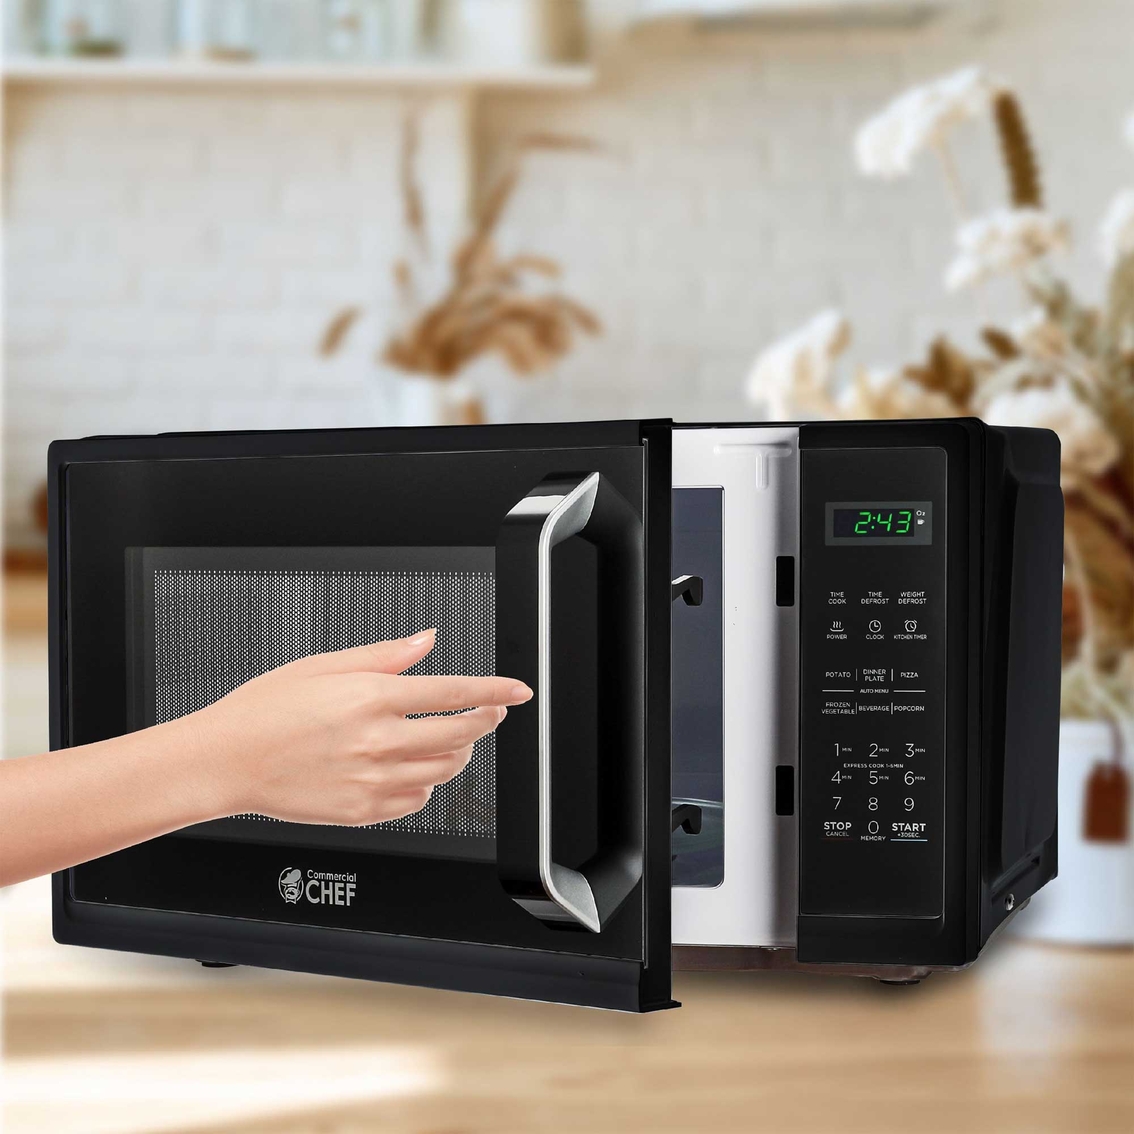 Commercial Chef 0.9 Cu. Ft. Countertop Microwave Oven - Image 5 of 7